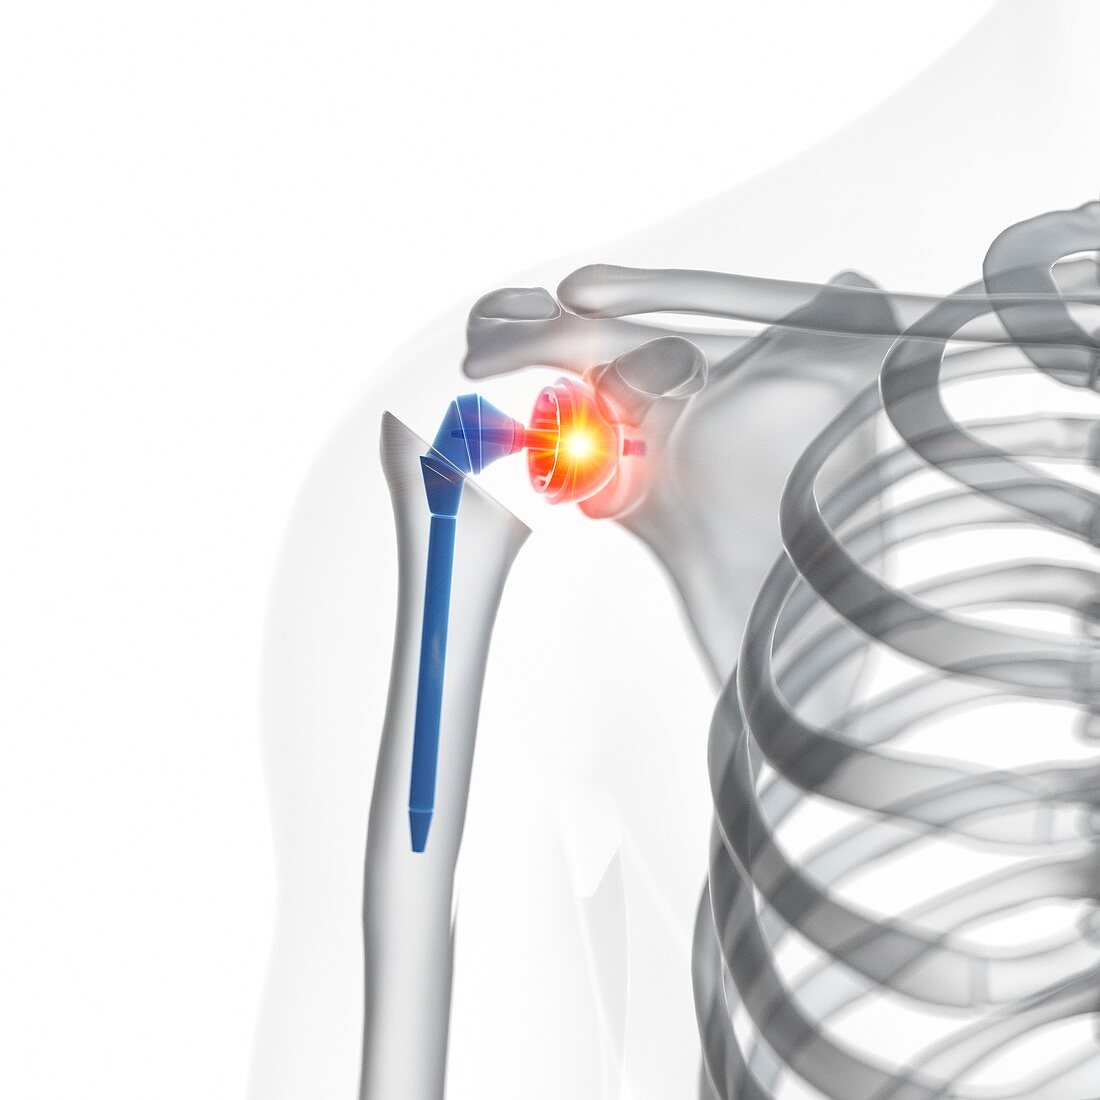 Illustration of a shoulder replacement